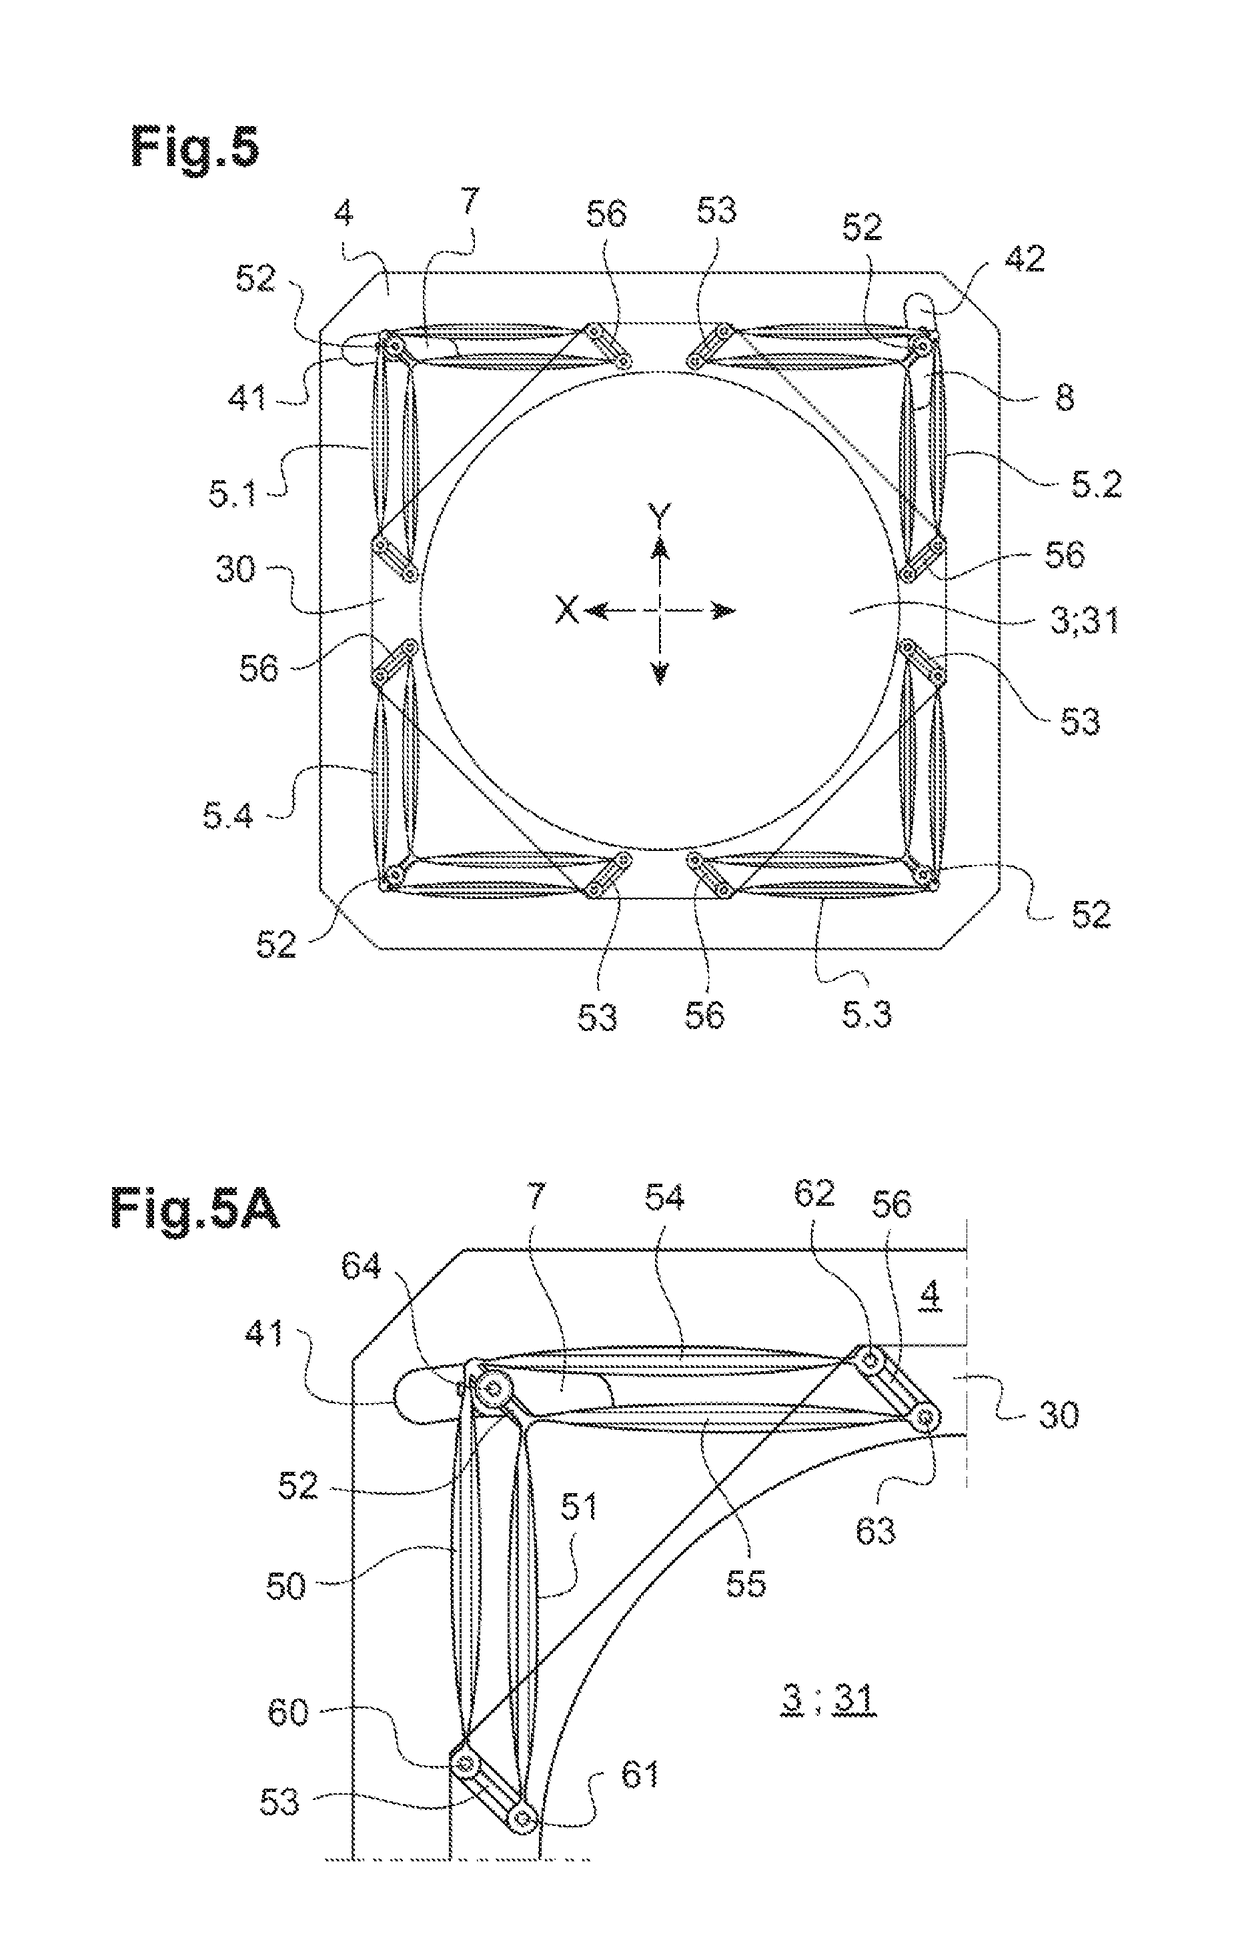 Transmit-array antenna comprising a mechanism for reorienting the direction of the beam